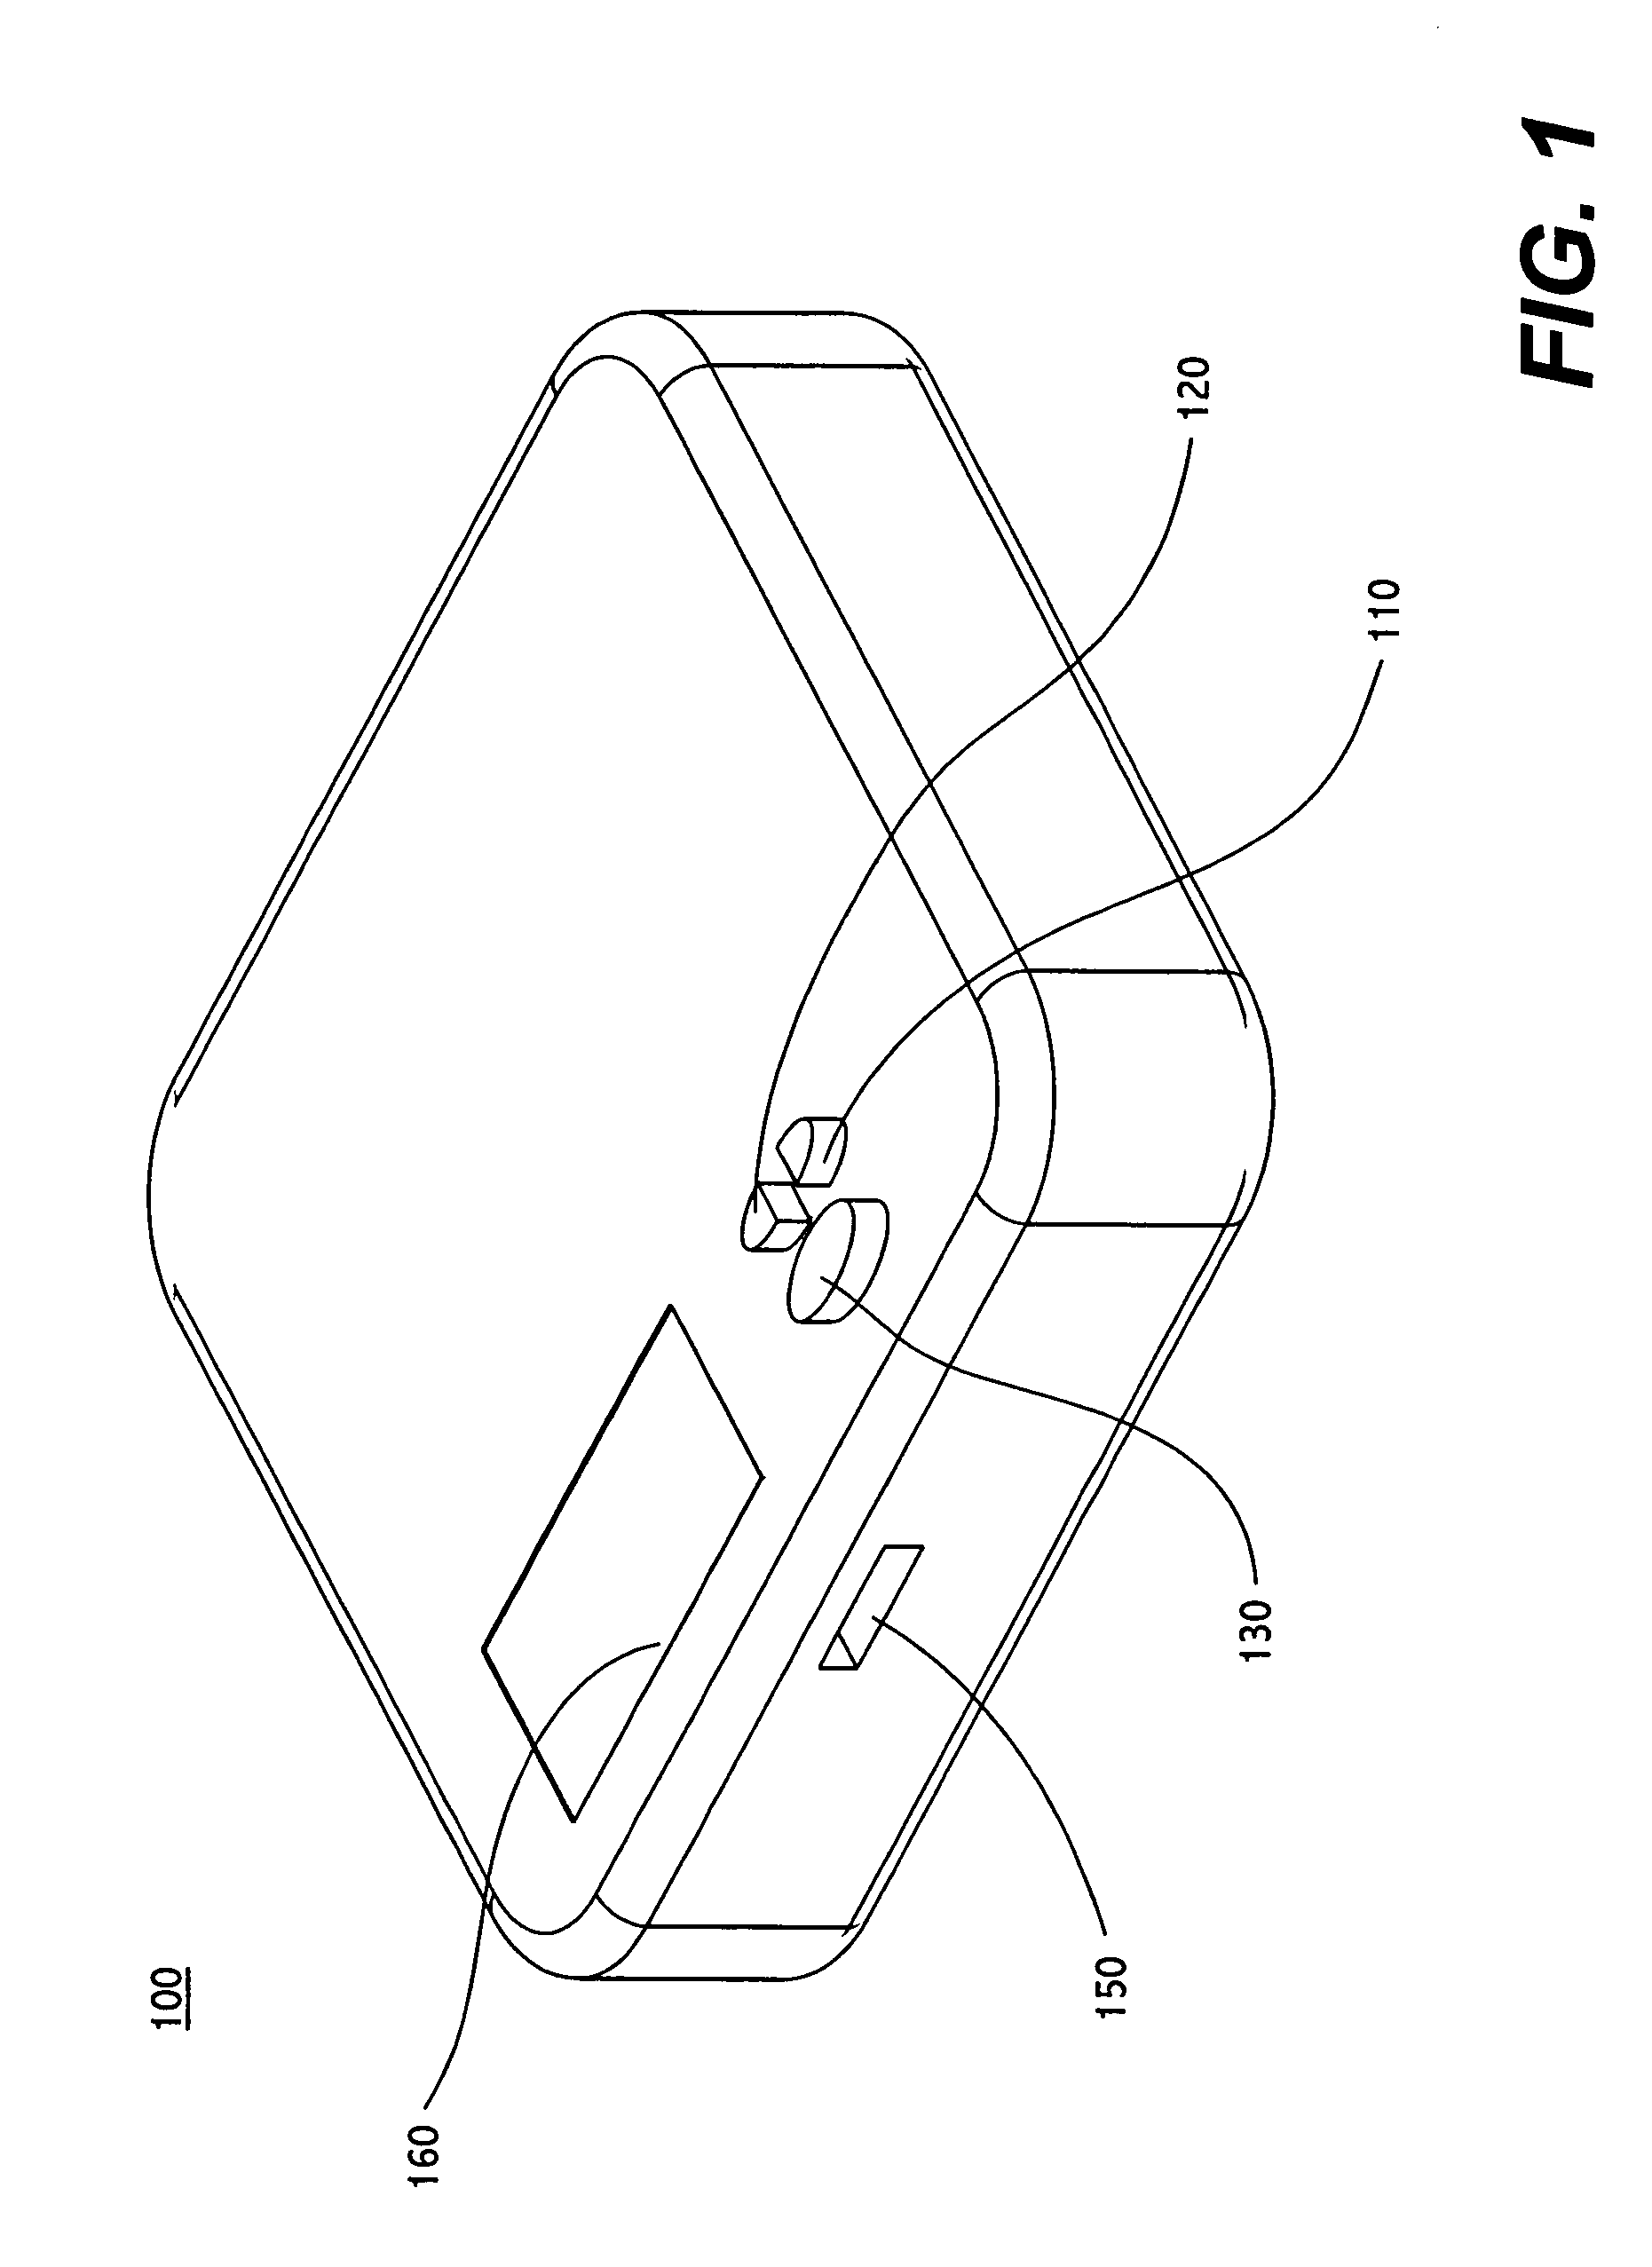 Apparatus and method for monitoring blood glucose levels including convenient display of blood glucose value average and constituent values